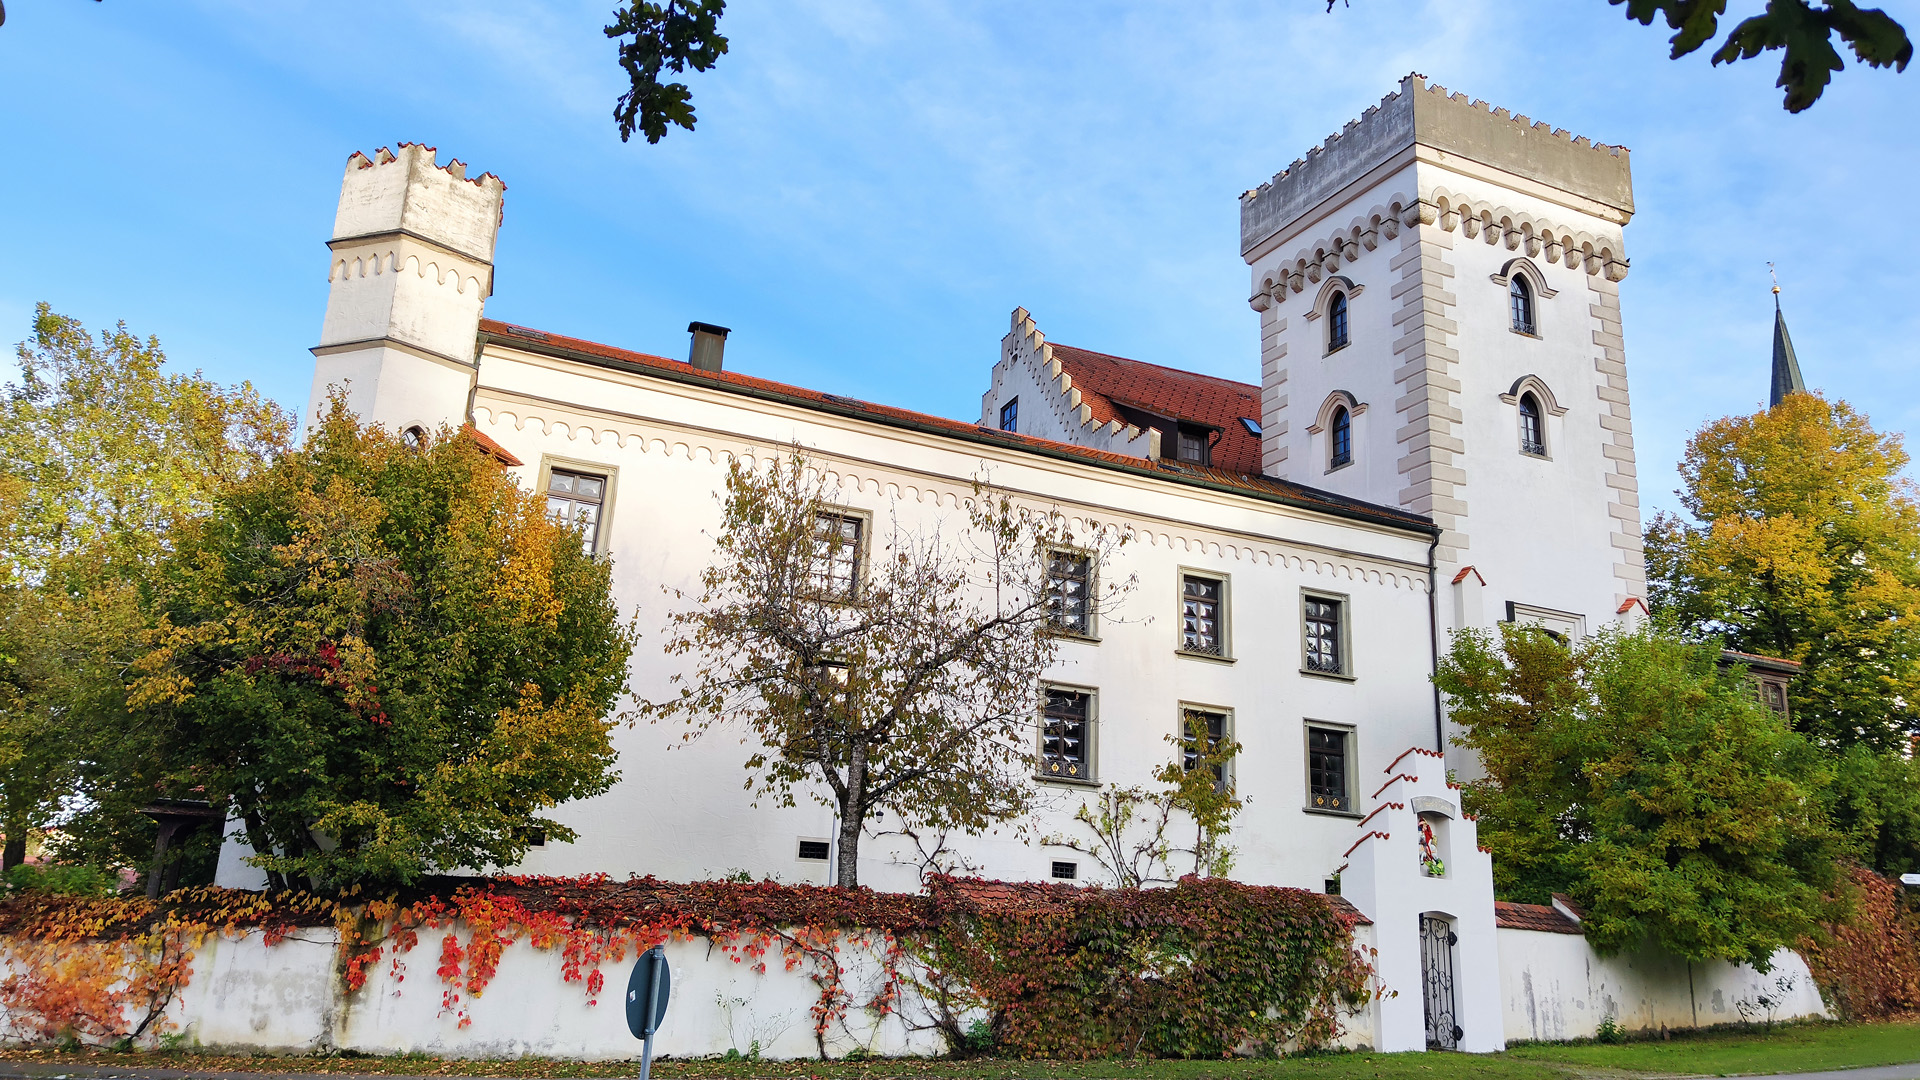 The main office of the Humboldt-Institut at Ratzenried Castle.